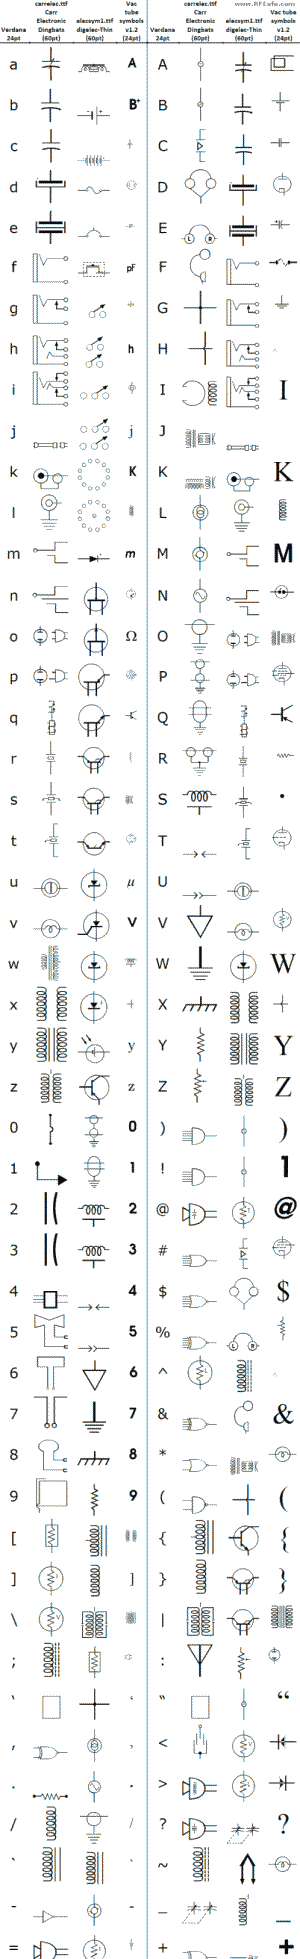 electronic symbols for excel